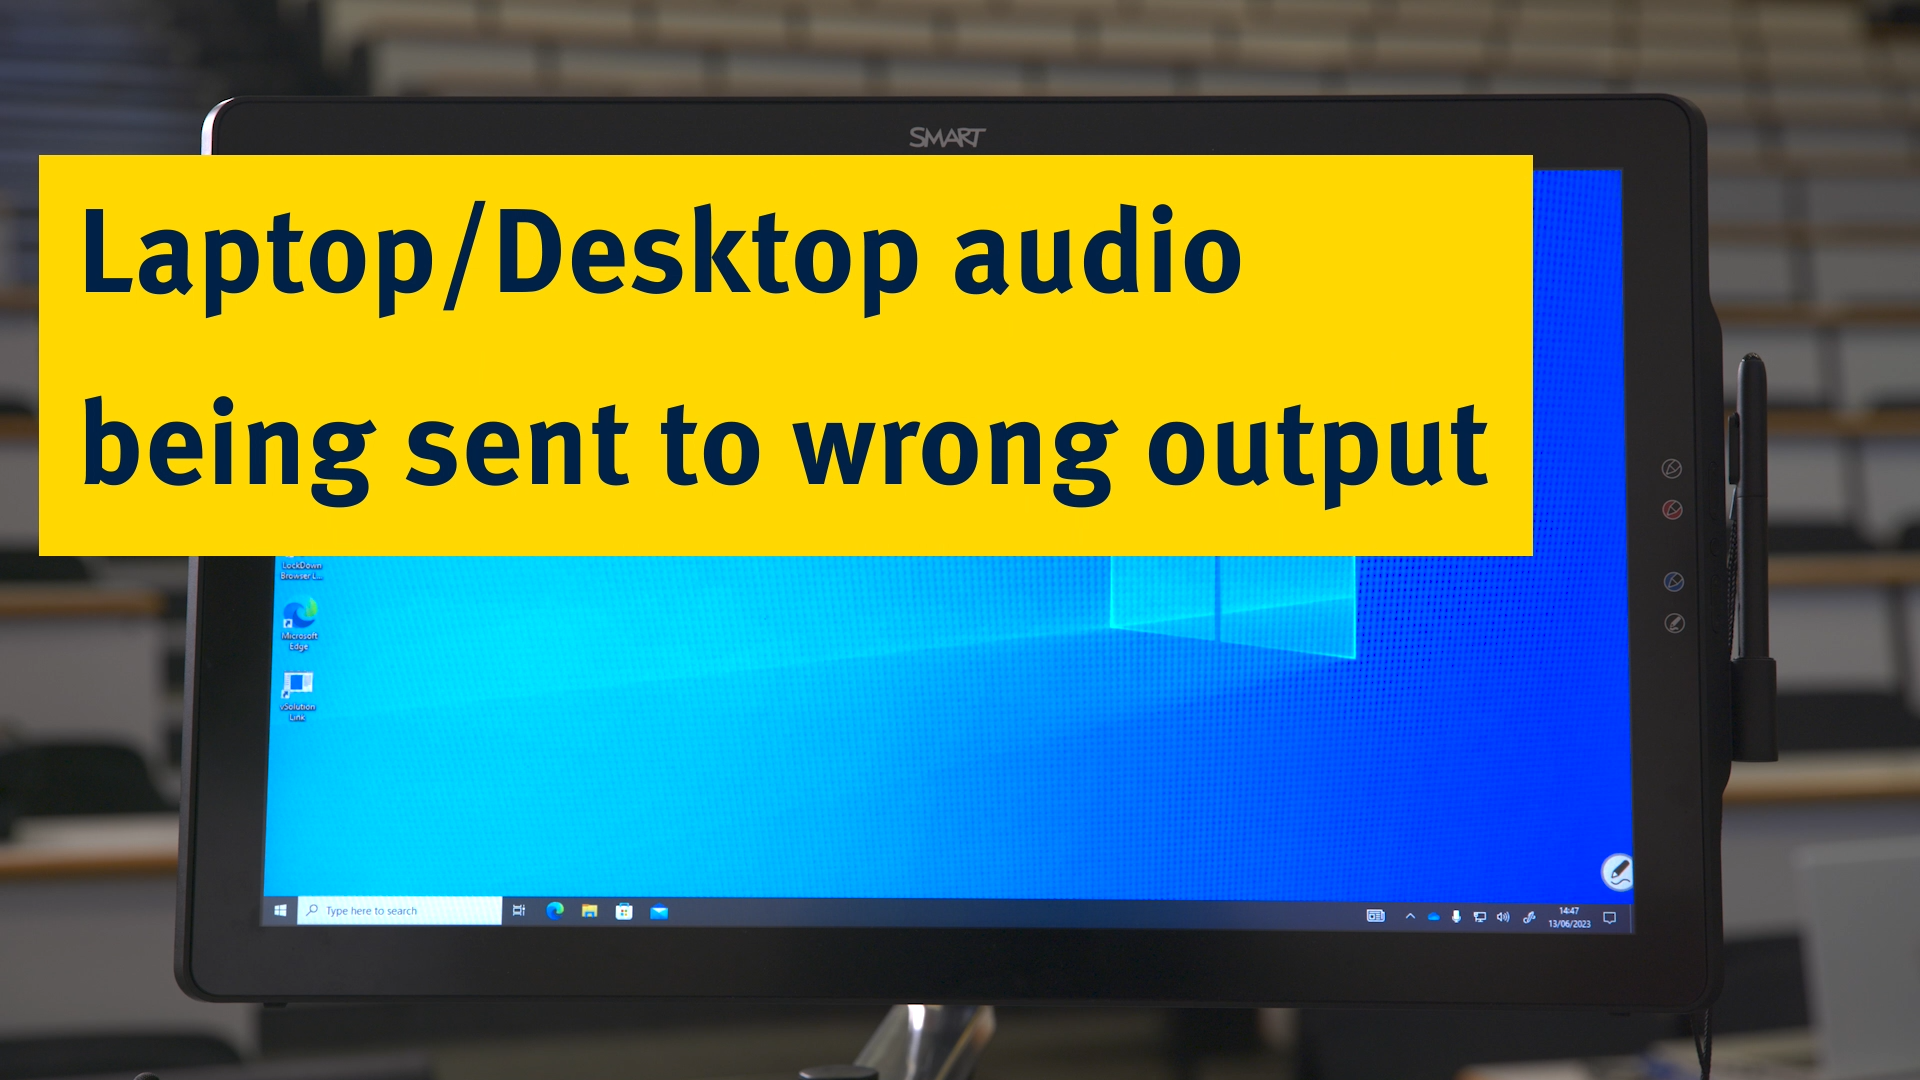 If the audio is playing from the wrong device